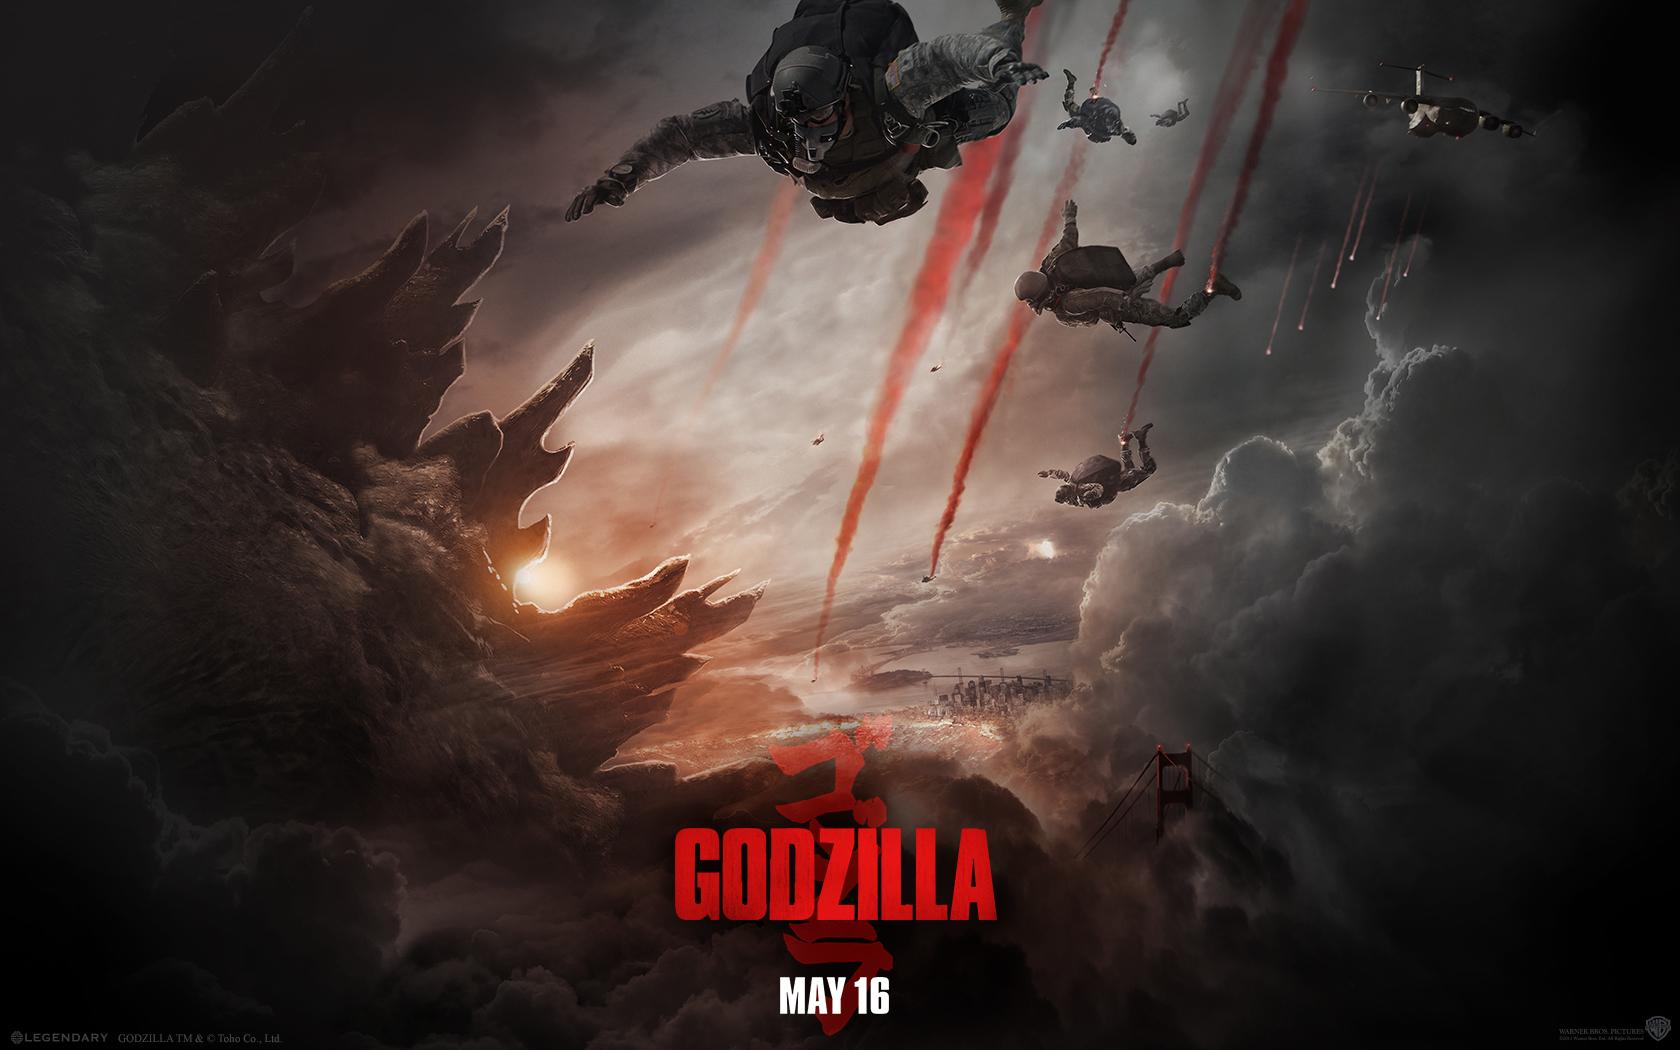 Official Godzilla 2014 HD Wallpaper 2014 Posters Image Gallery